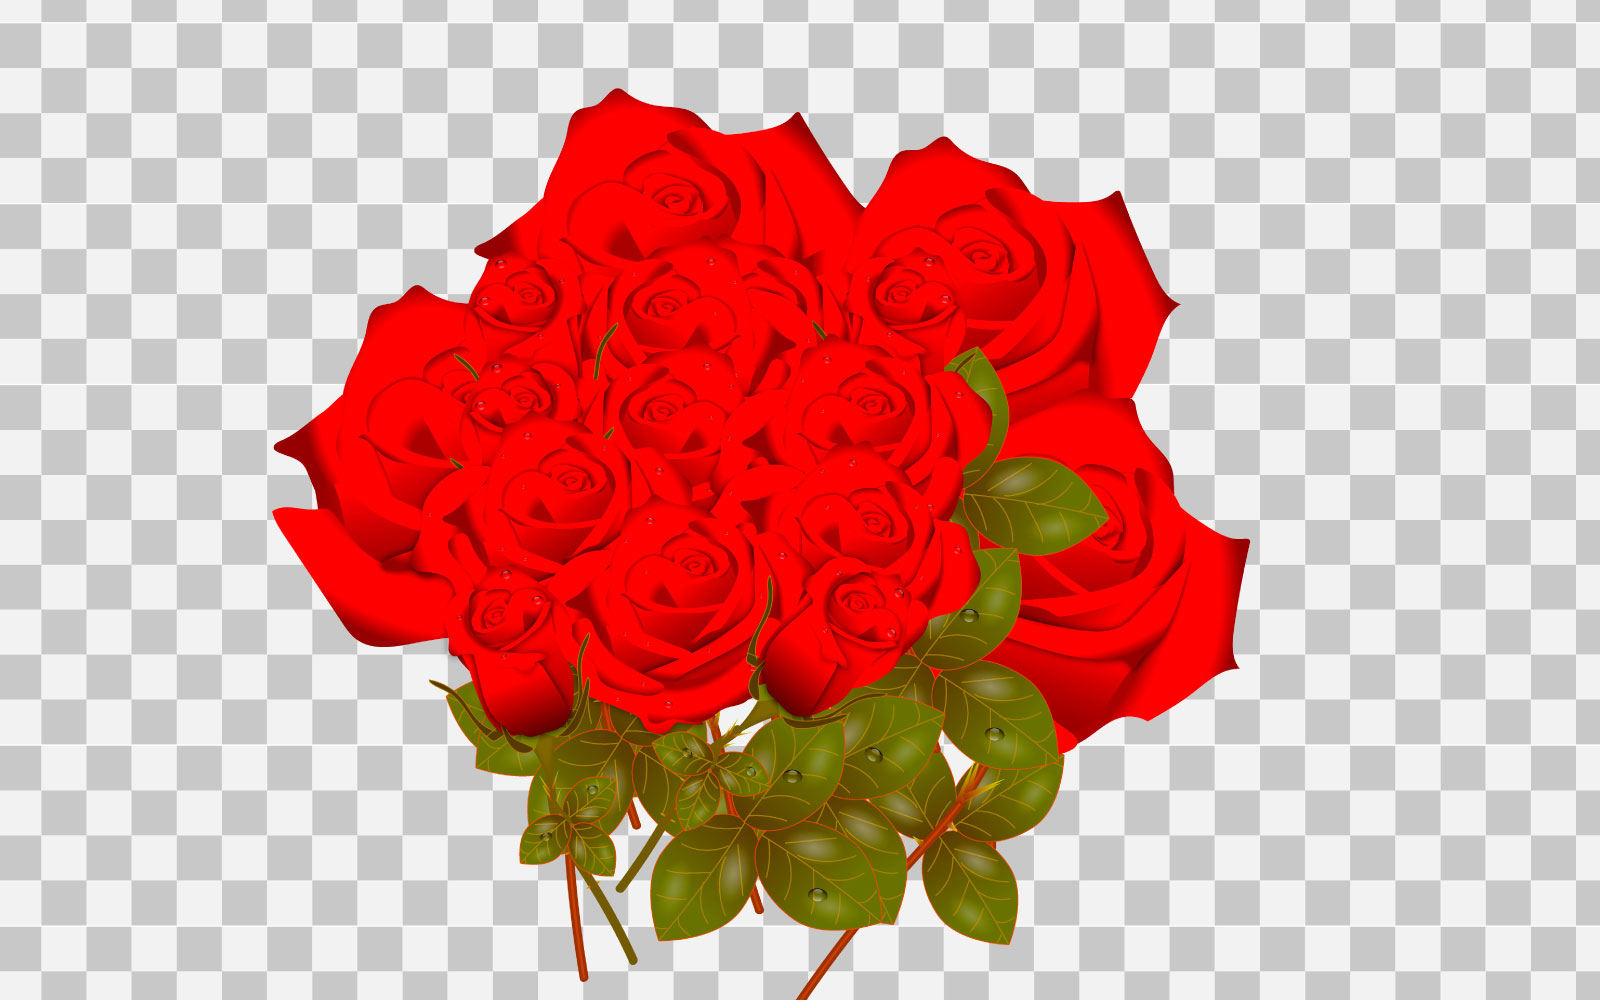 vector red rose realistic rose bouquet  with red flower illustration idea